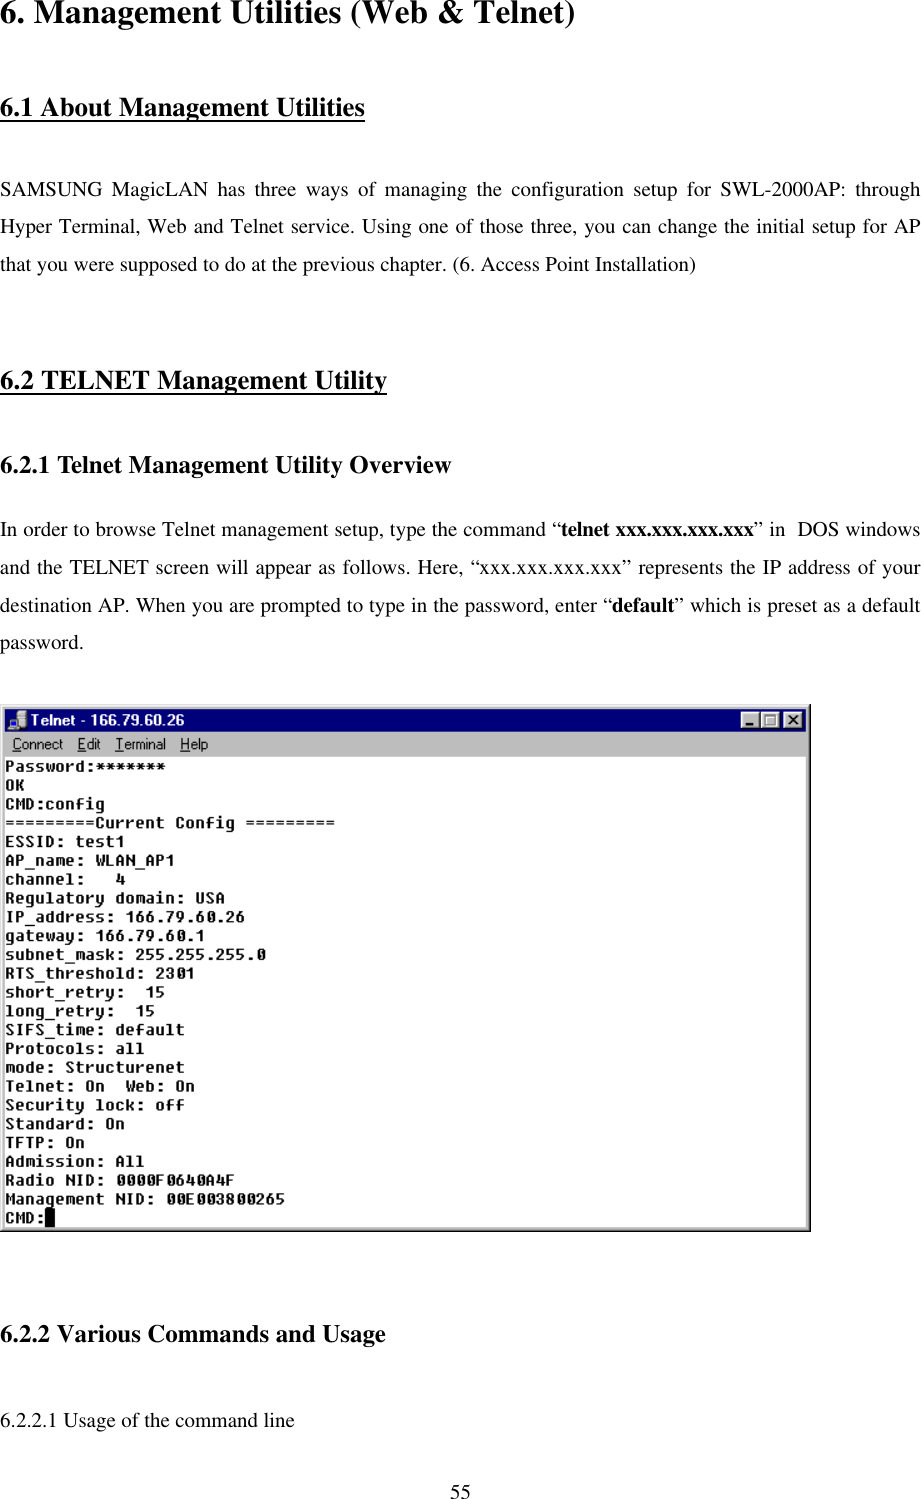 556. Management Utilities (Web &amp; Telnet)6.1 About Management UtilitiesSAMSUNG MagicLAN has three ways of managing the configuration setup for SWL-2000AP: throughHyper Terminal, Web and Telnet service. Using one of those three, you can change the initial setup for APthat you were supposed to do at the previous chapter. (6. Access Point Installation)6.2 TELNET Management Utility6.2.1 Telnet Management Utility OverviewIn order to browse Telnet management setup, type the command “telnet xxx.xxx.xxx.xxx” in  DOS windowsand the TELNET screen will appear as follows. Here, “xxx.xxx.xxx.xxx” represents the IP address of yourdestination AP. When you are prompted to type in the password, enter “default” which is preset as a defaultpassword.6.2.2 Various Commands and Usage6.2.2.1 Usage of the command line